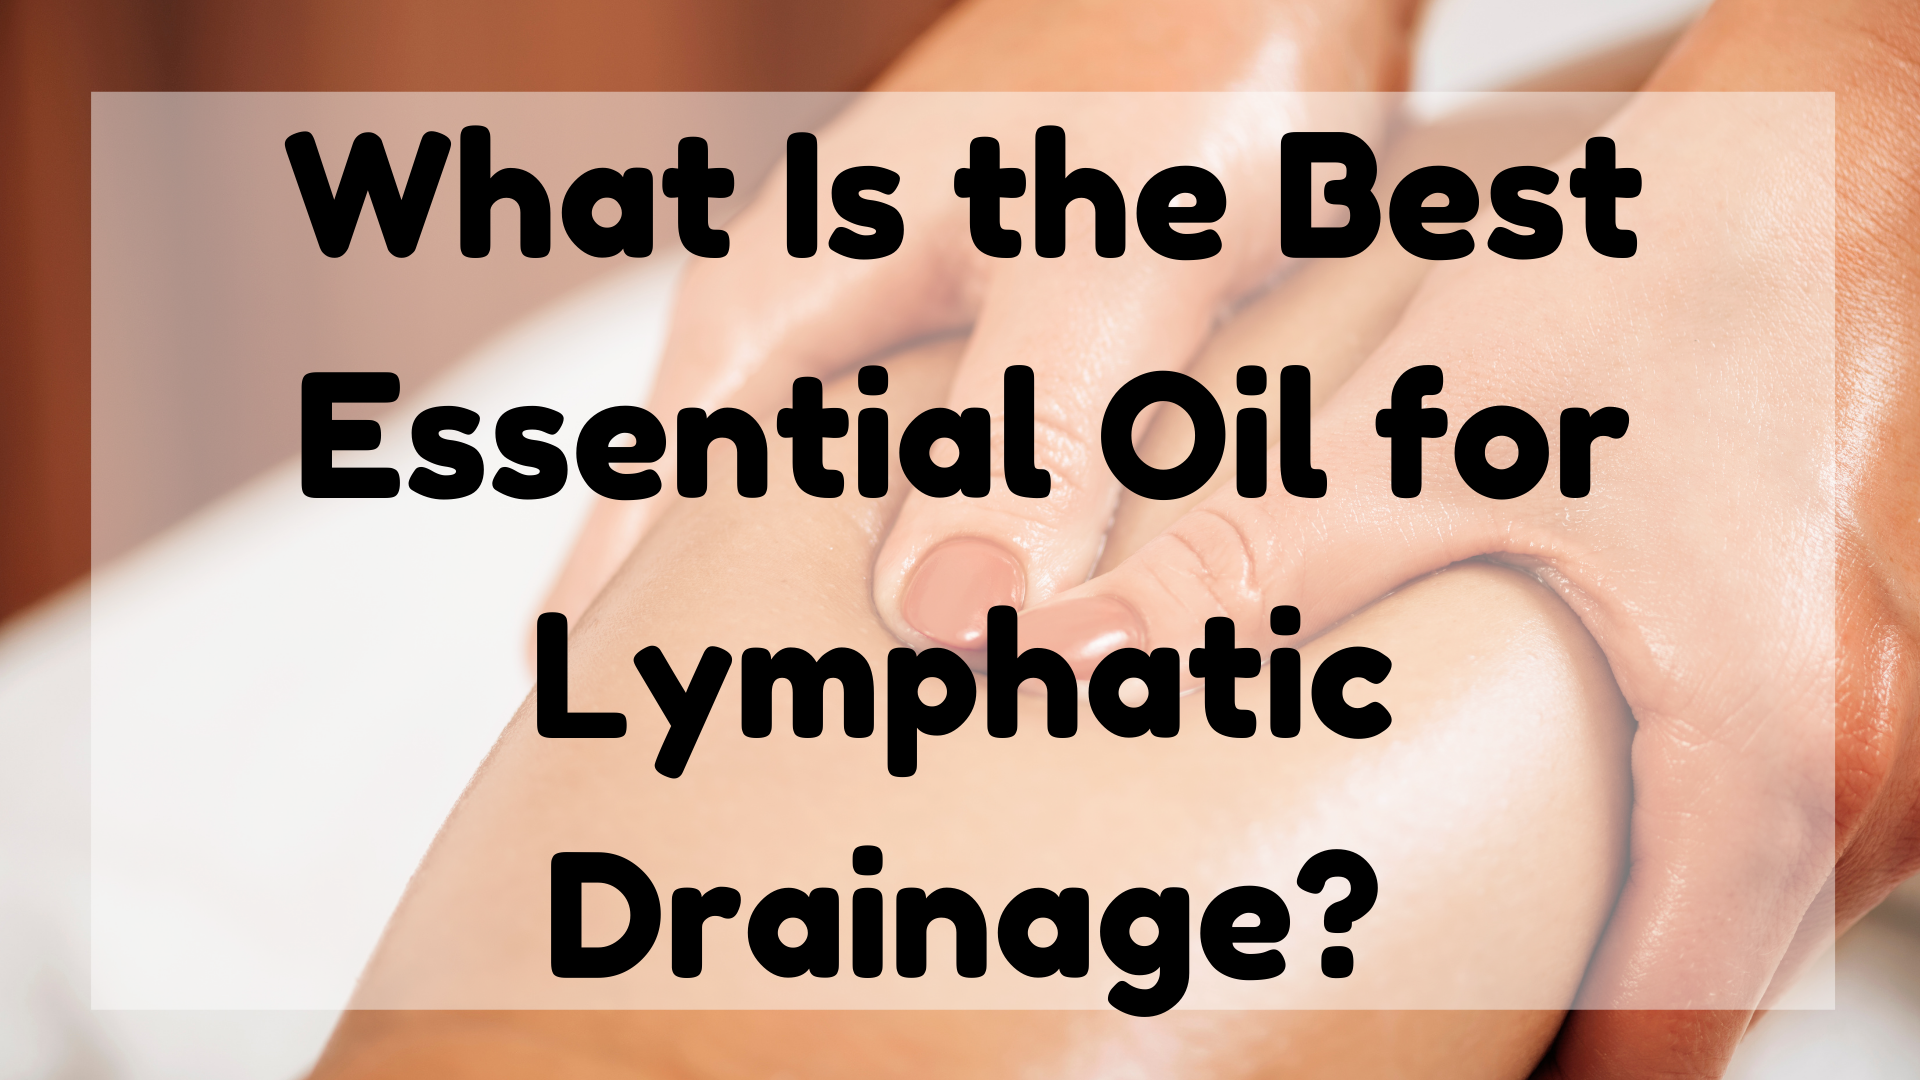 Essential Oil for Lymphatic Drainage